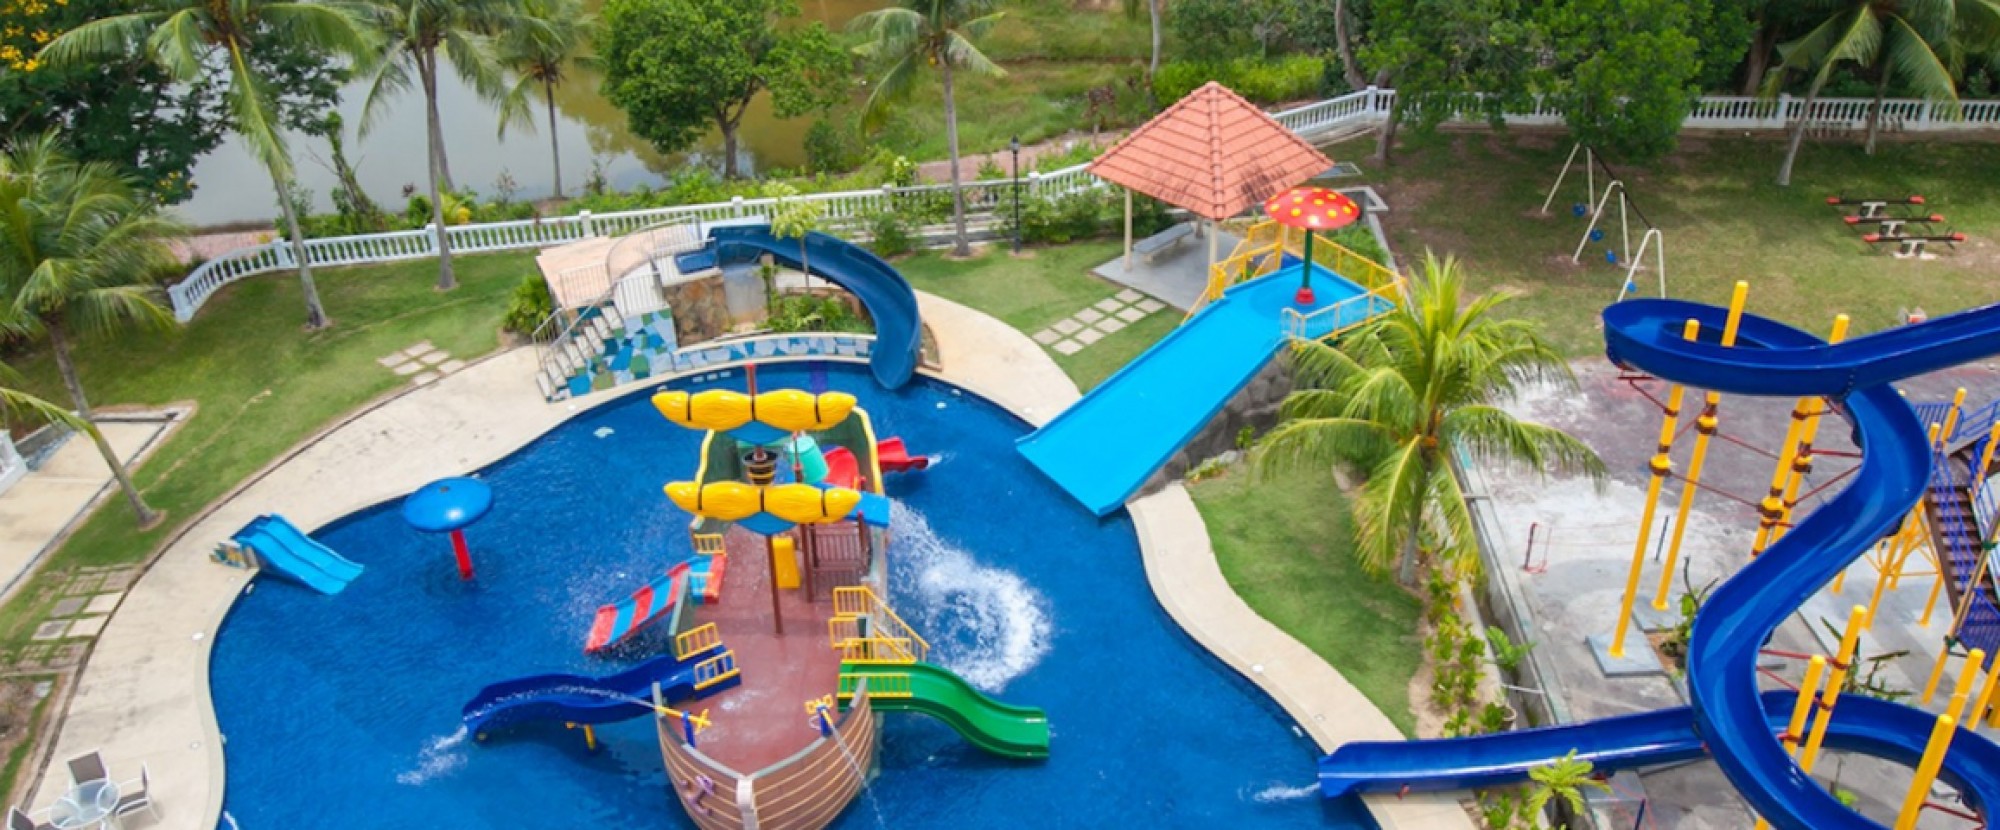 Amverton Heritage Resort Melaka 2d1n Family Package Malacca Malaysia Air Inclusive Tour Af Travel